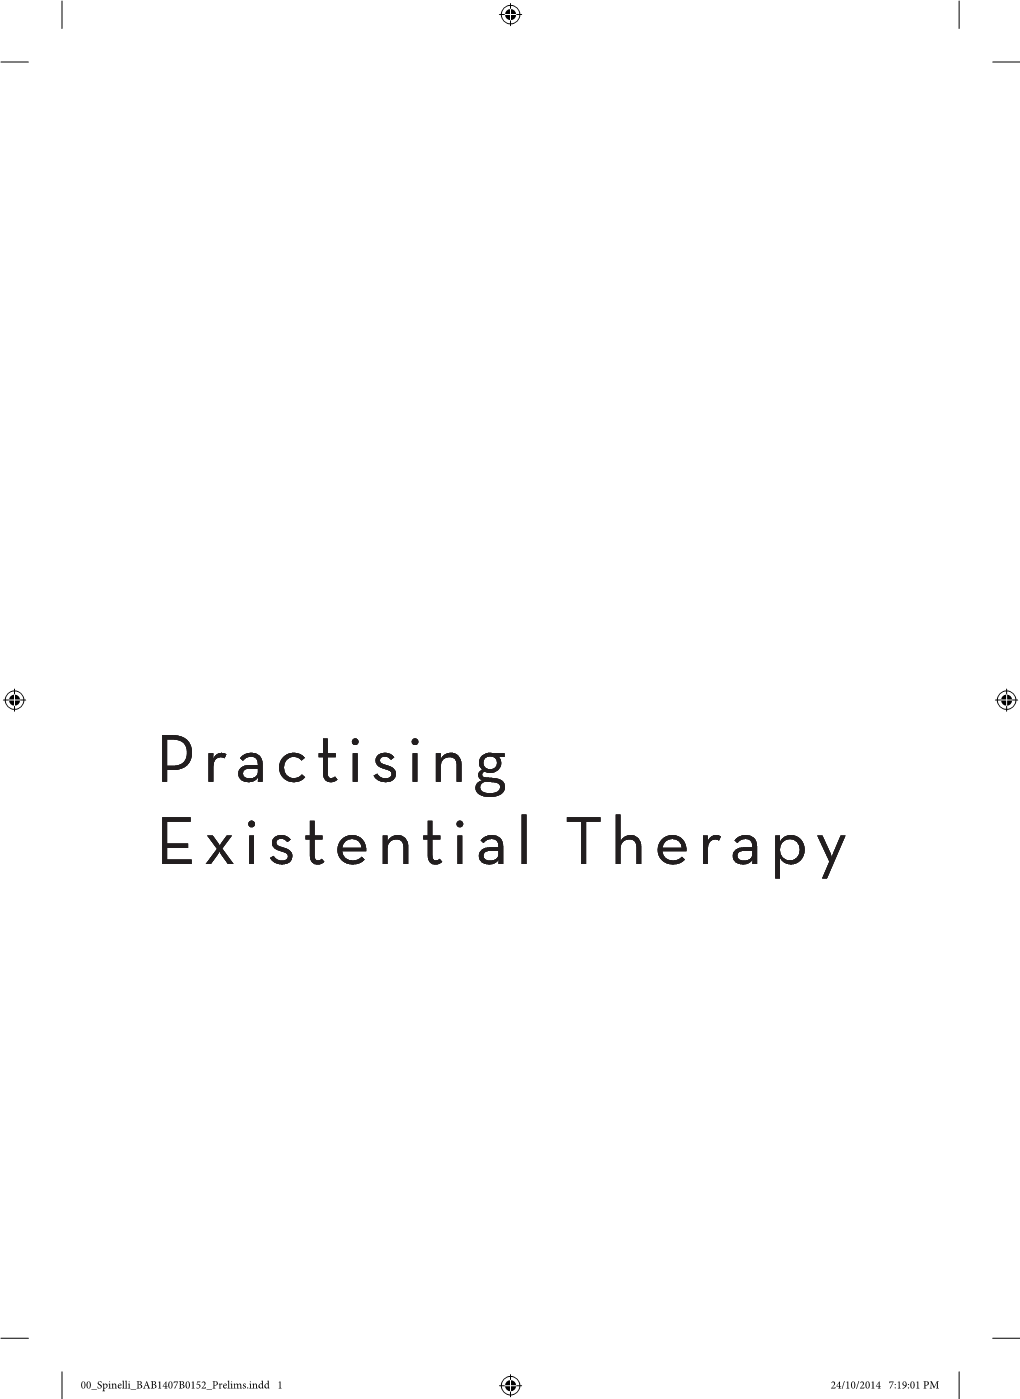 Practising Existential Therapy Practising Existential Therapy Practising Existential Therapy